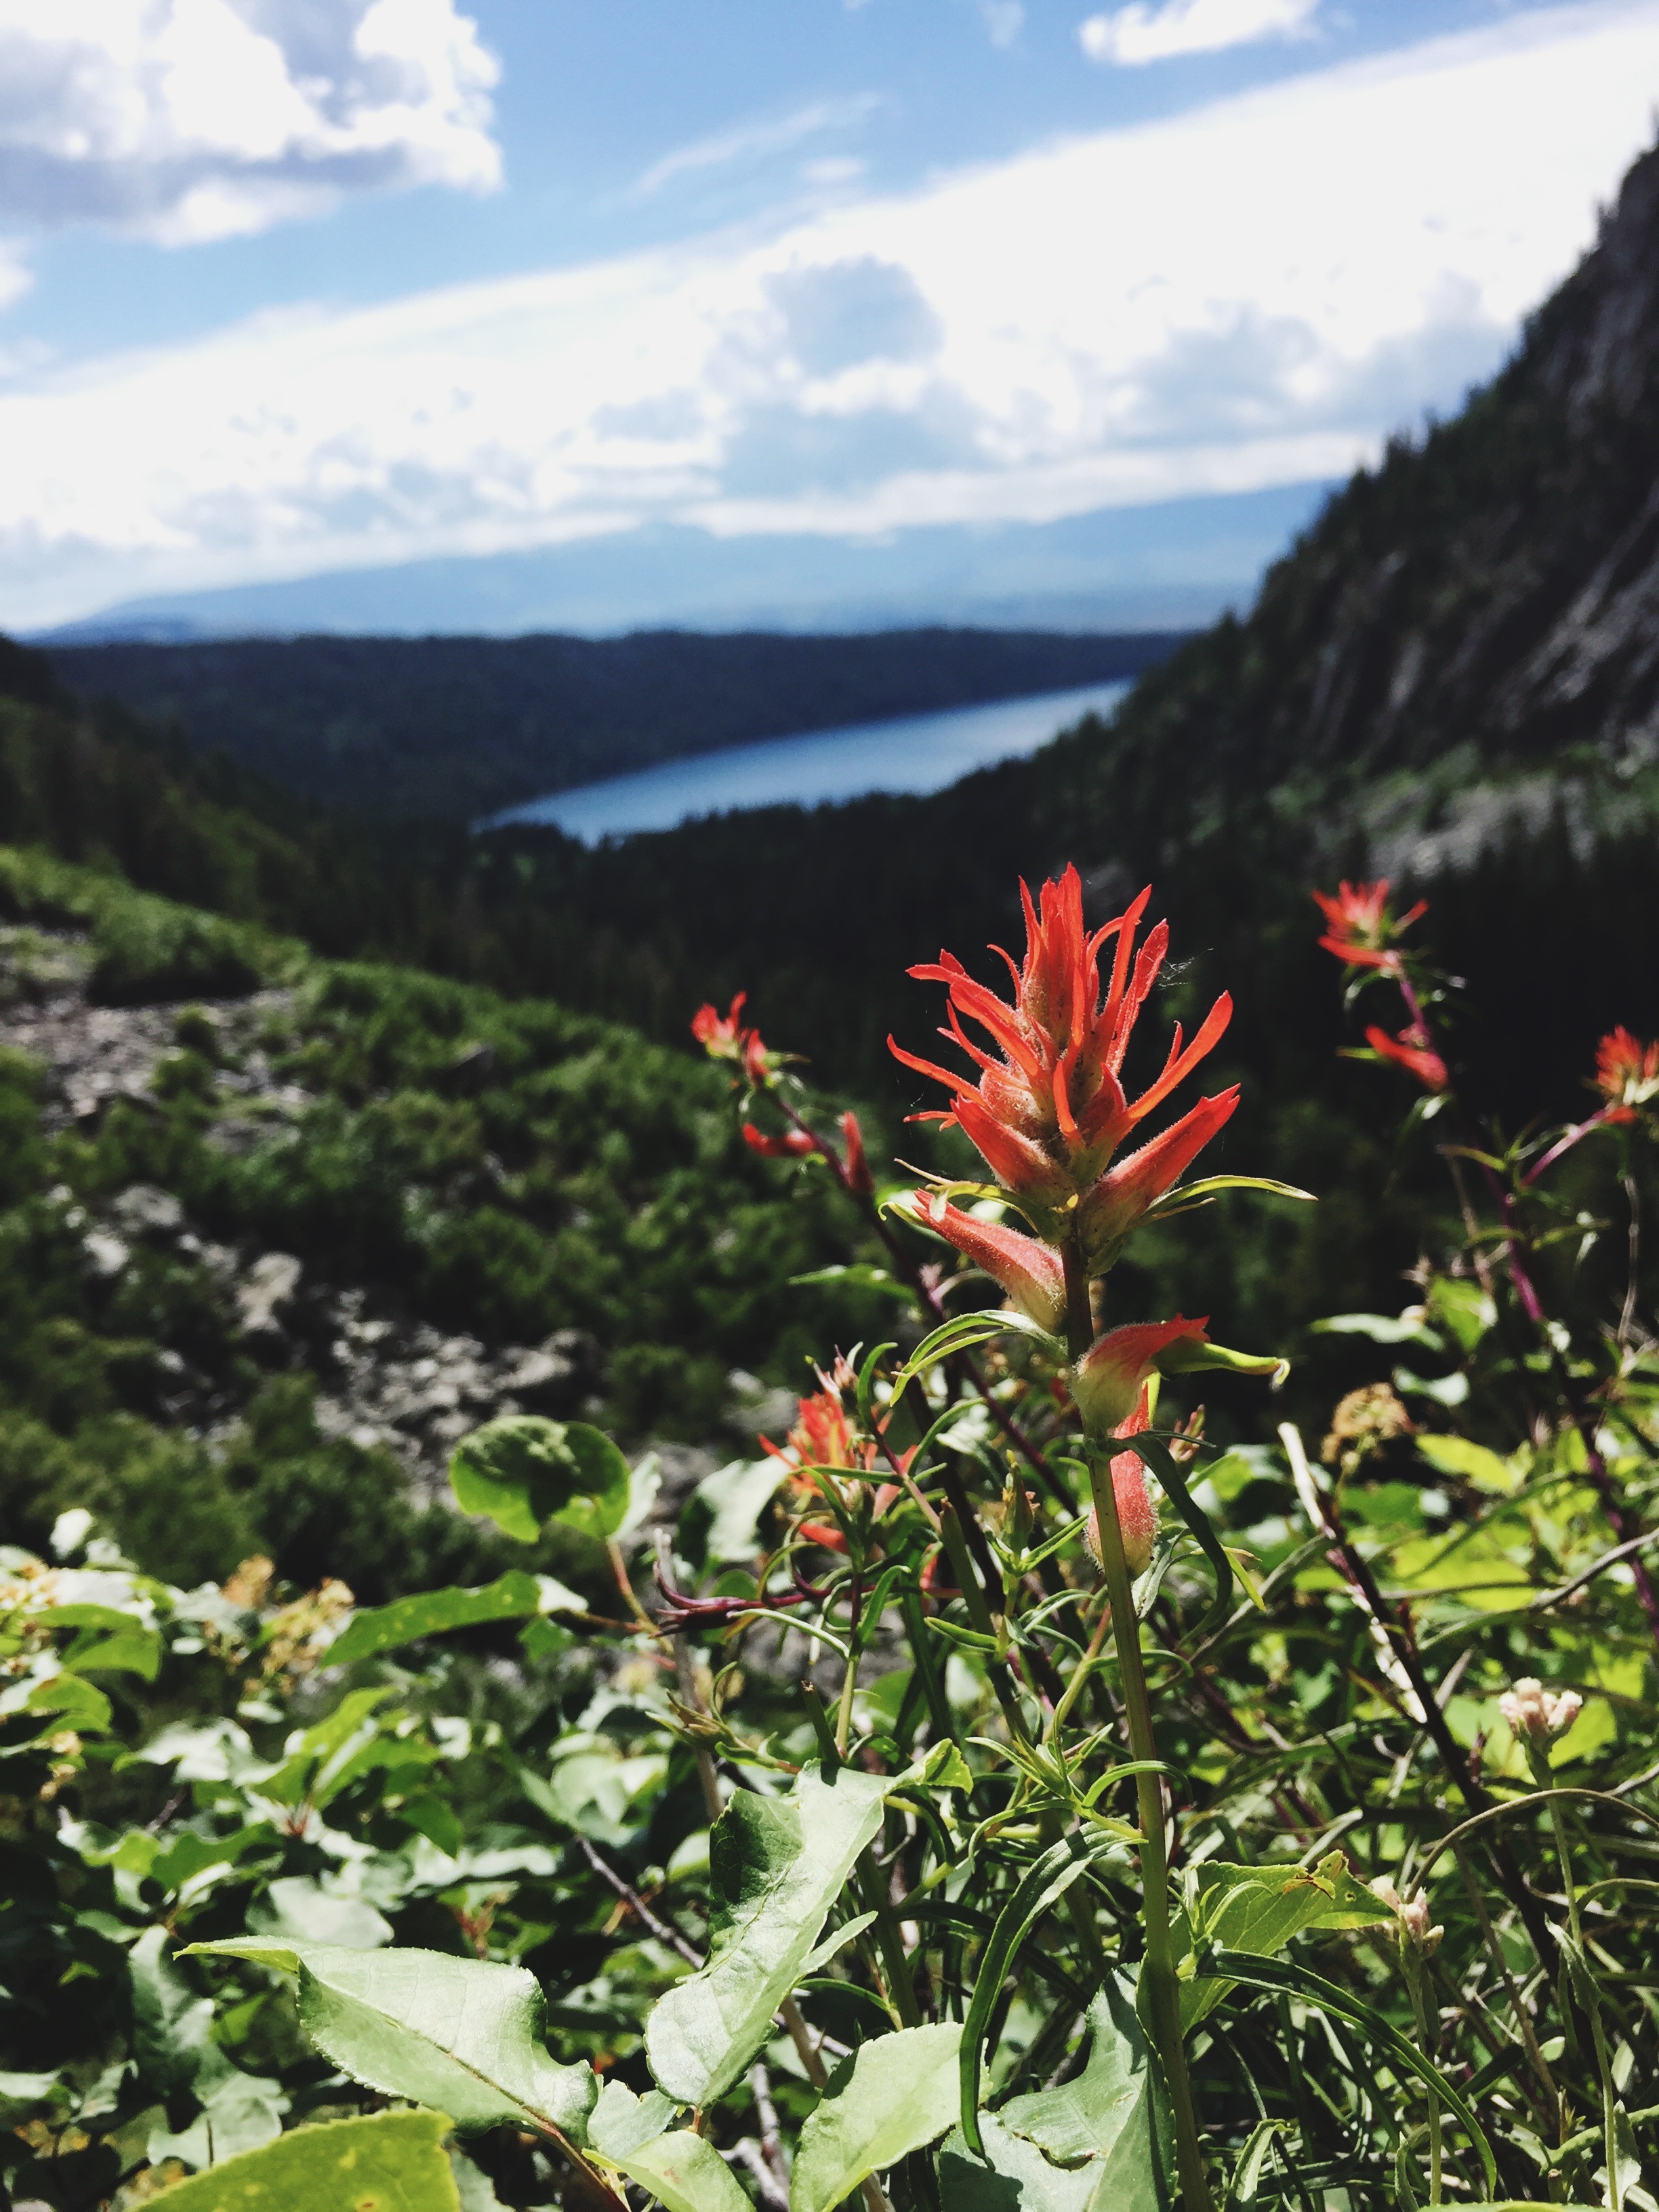 a red indian paintbrush at the edge of a steep hill with a lake tucked in the background